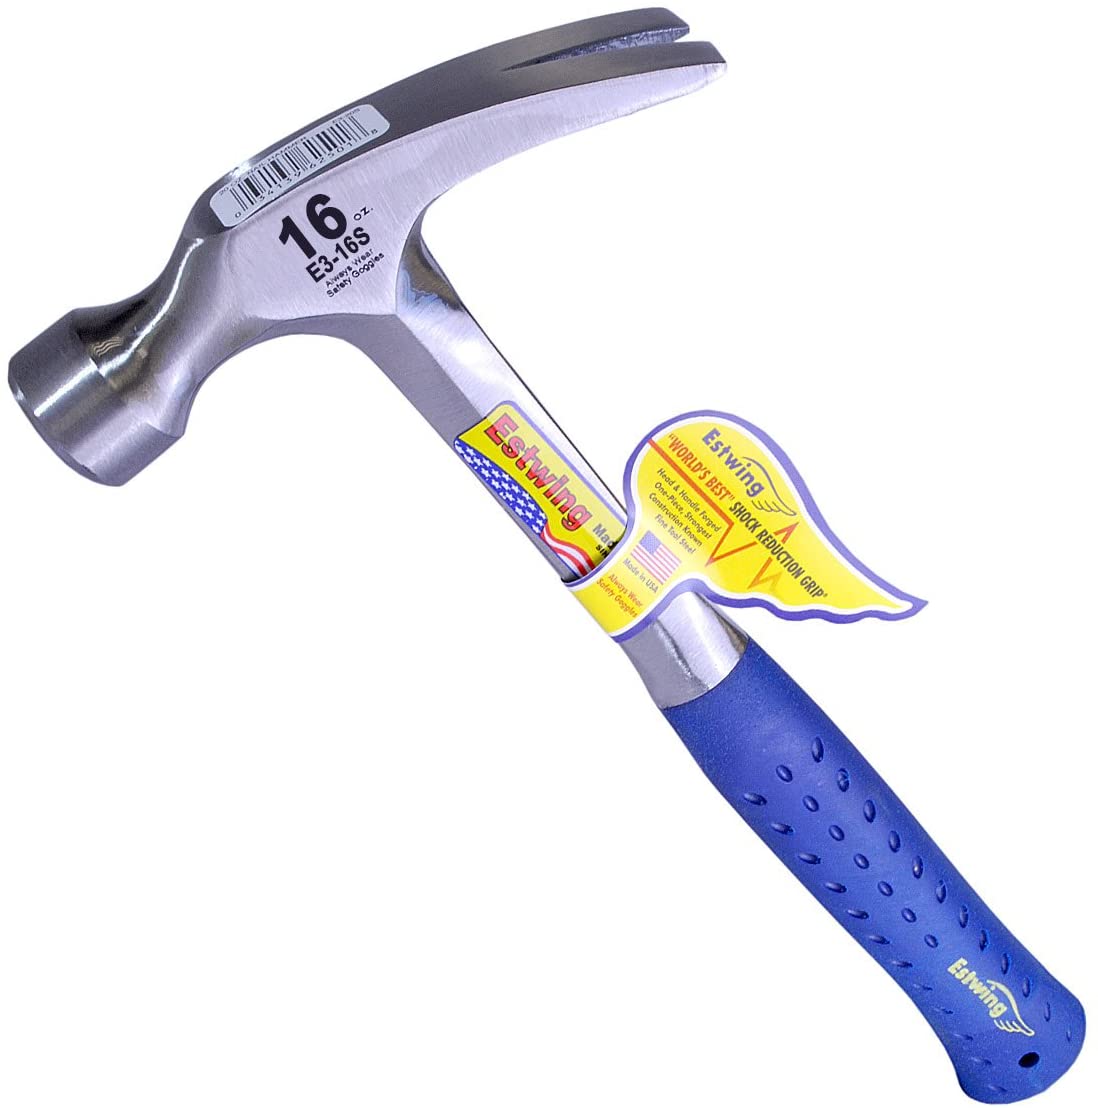 Estwing Hammer With Podger Claw Vinyl Handle 21oz, 53% OFF